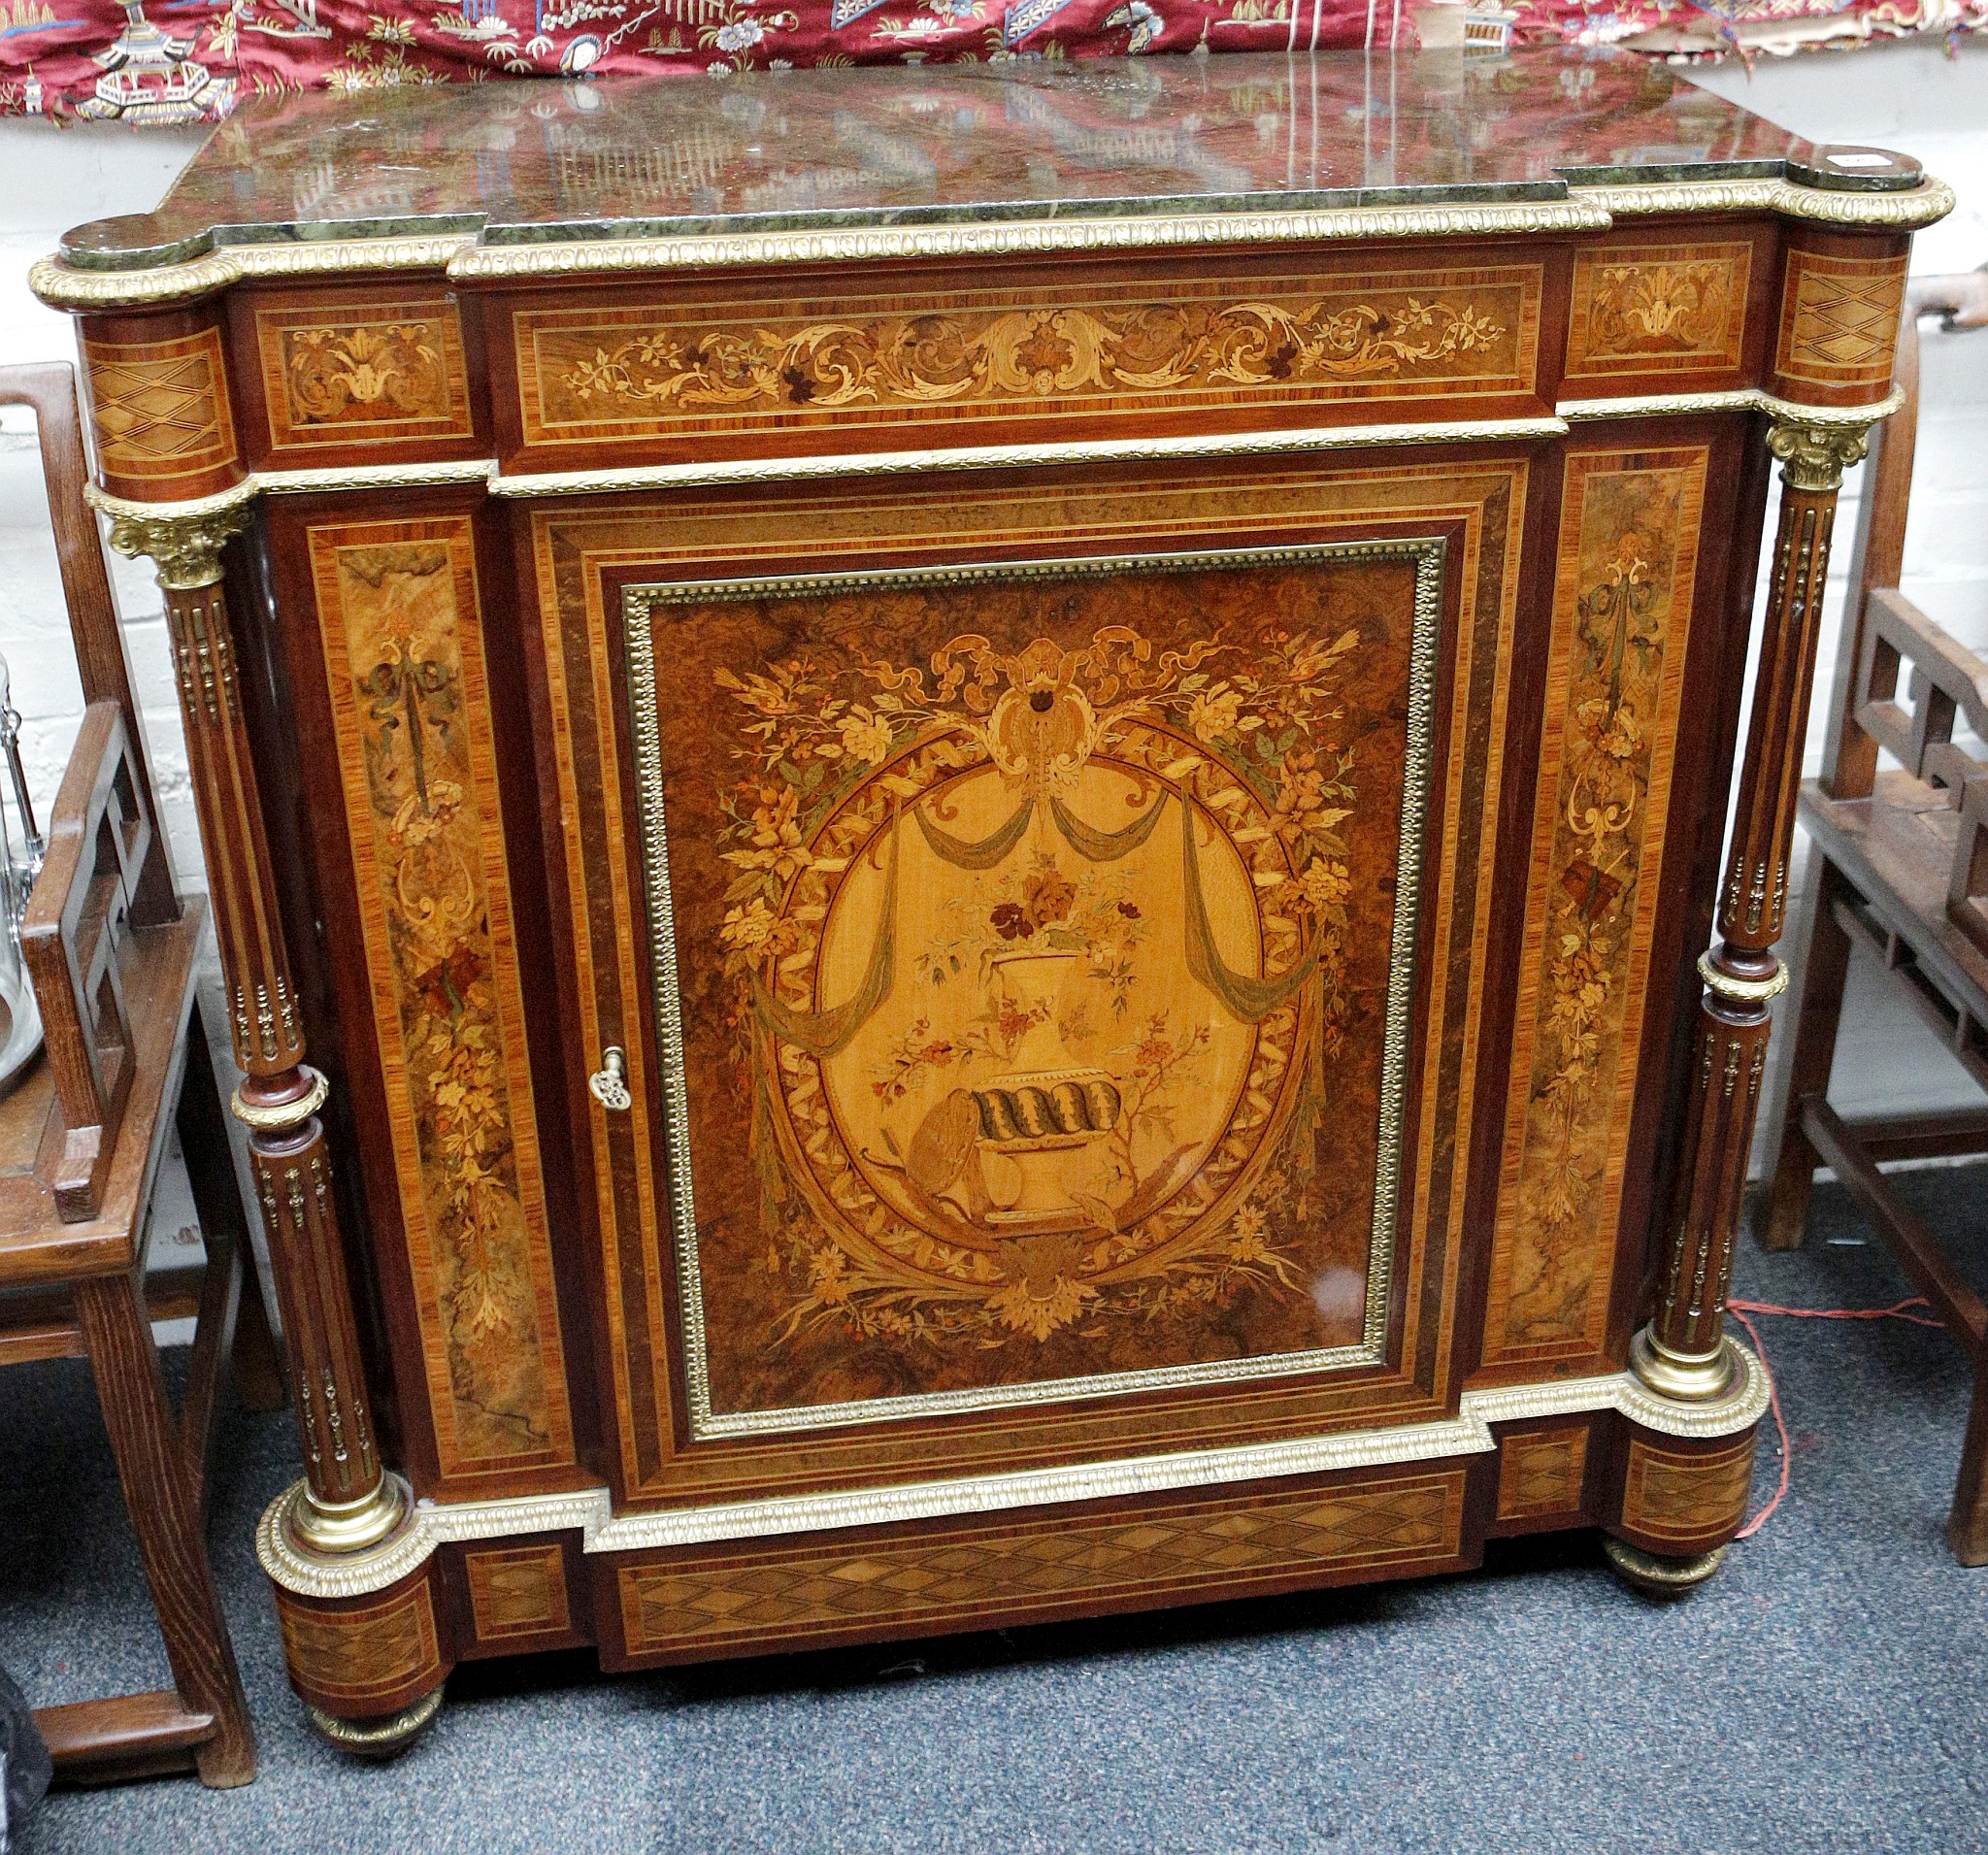 A fine 19th century ormolu mounted, marble topped pier cabinet, the front and sides profusely